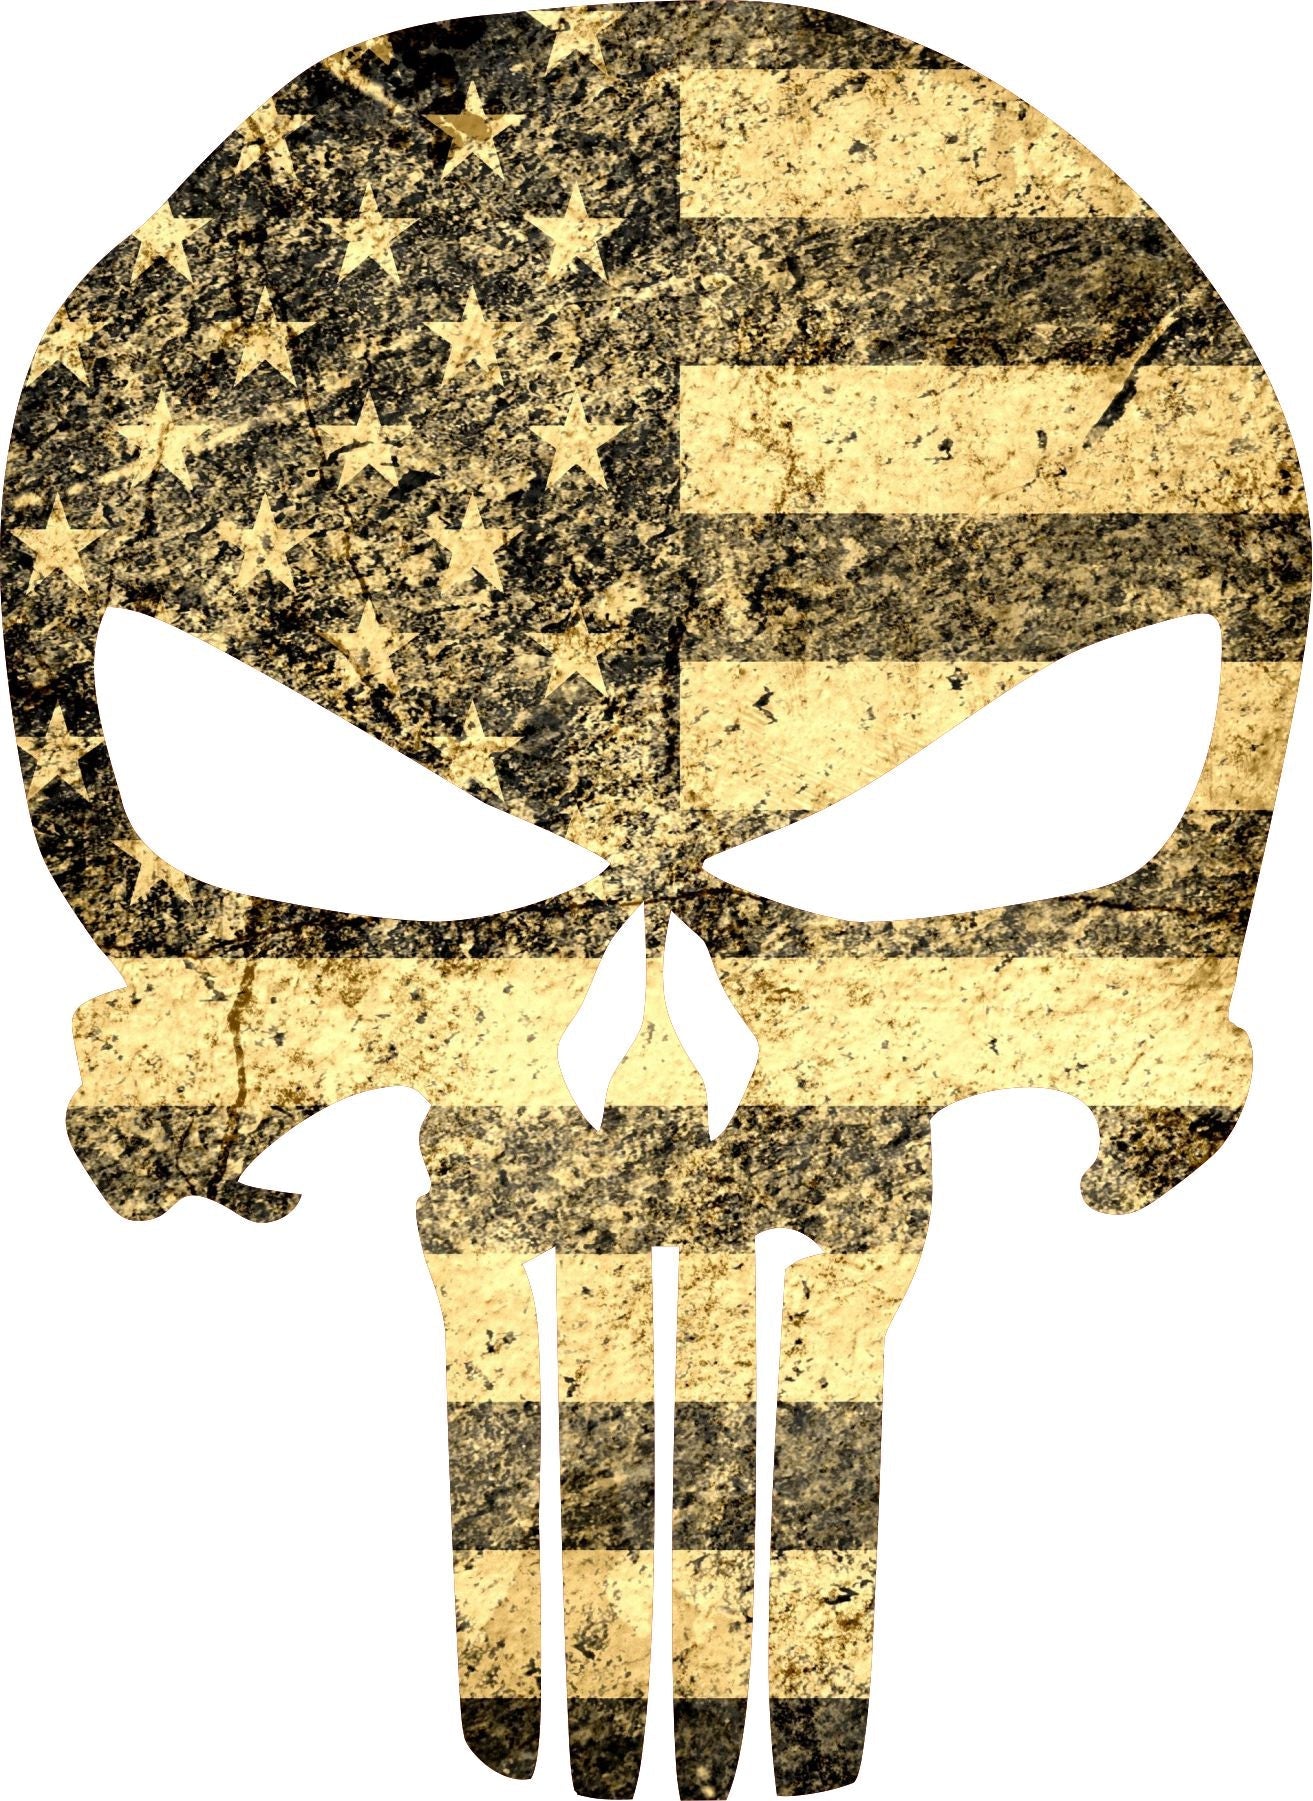 Punisher Skull Vintage USA Flag Punisher Exterior Decal - Graphic Various Sizes - Powercall Sirens LLC